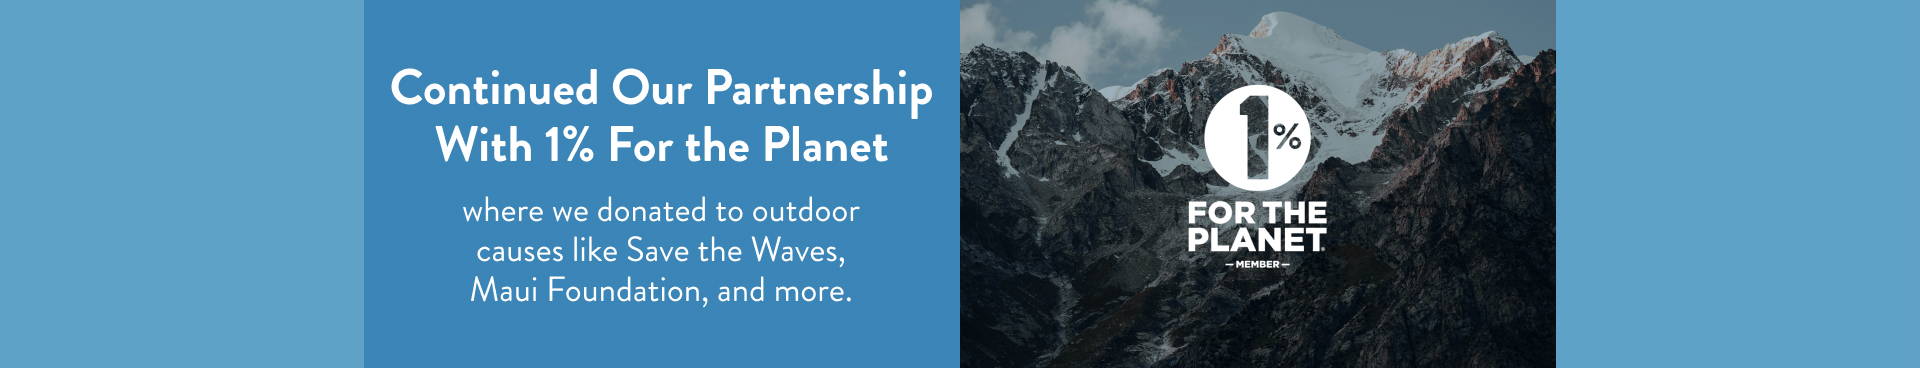 Continued Our Partnership With 1% For the Planet